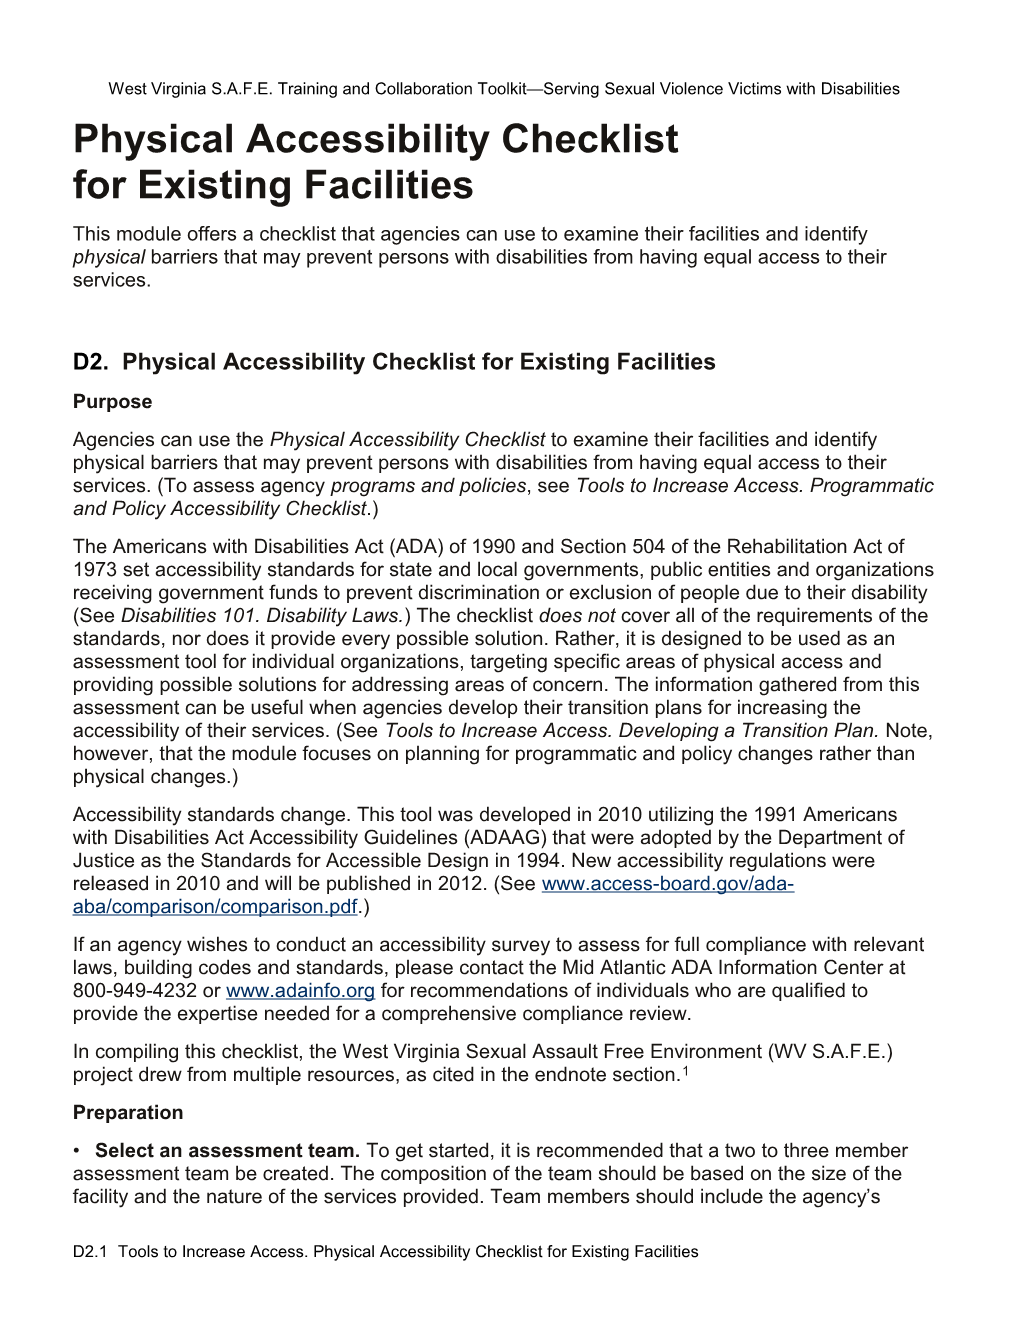 D2. Tools to Increase Access. Physical Accessibility Checklist for Existing Facilities